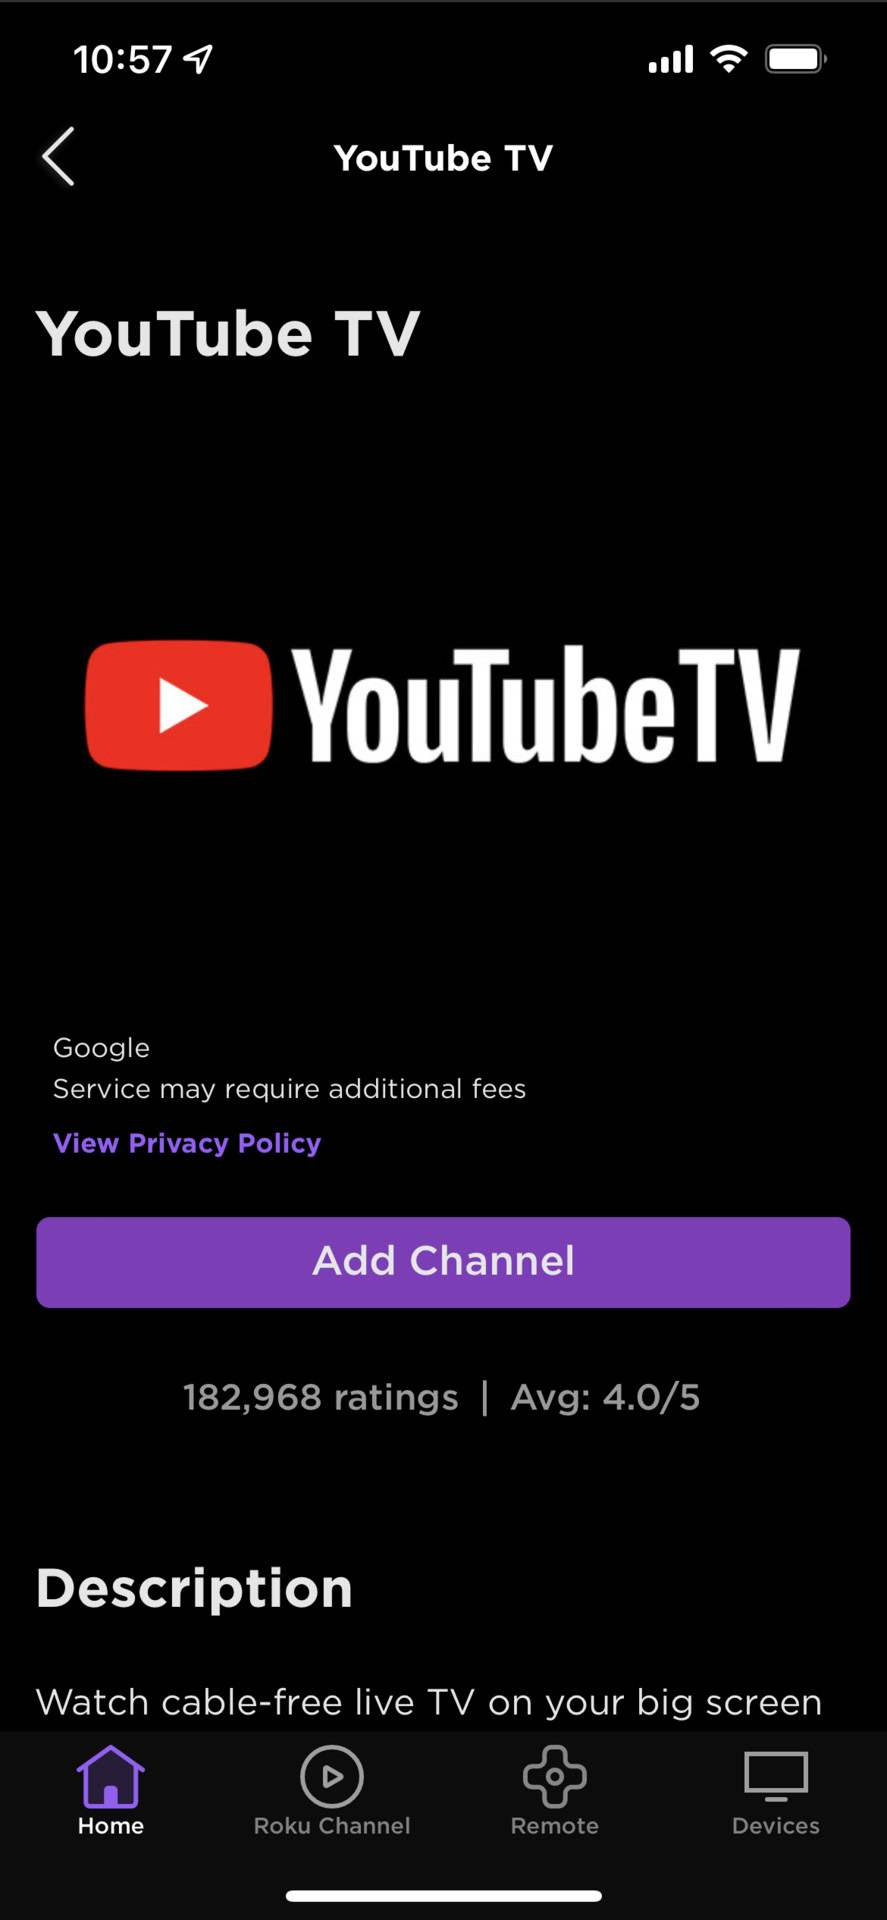 The YouTube TV listing in the Roku app